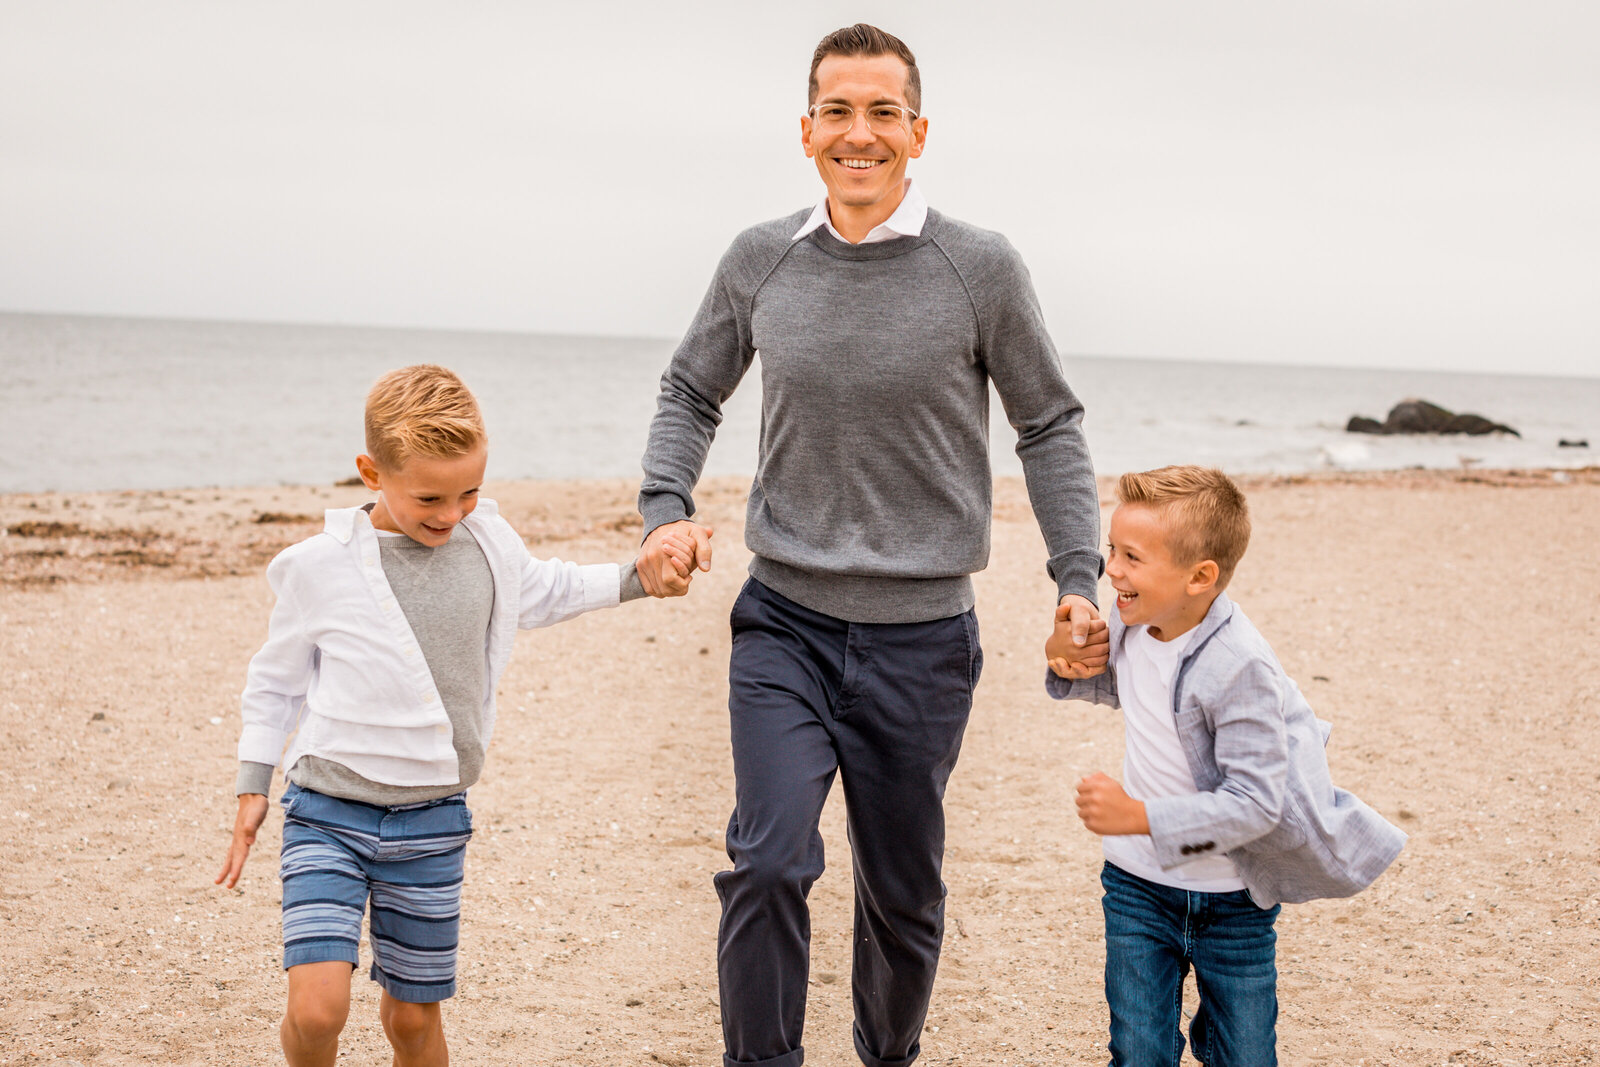 dad is running with his boys on the beach